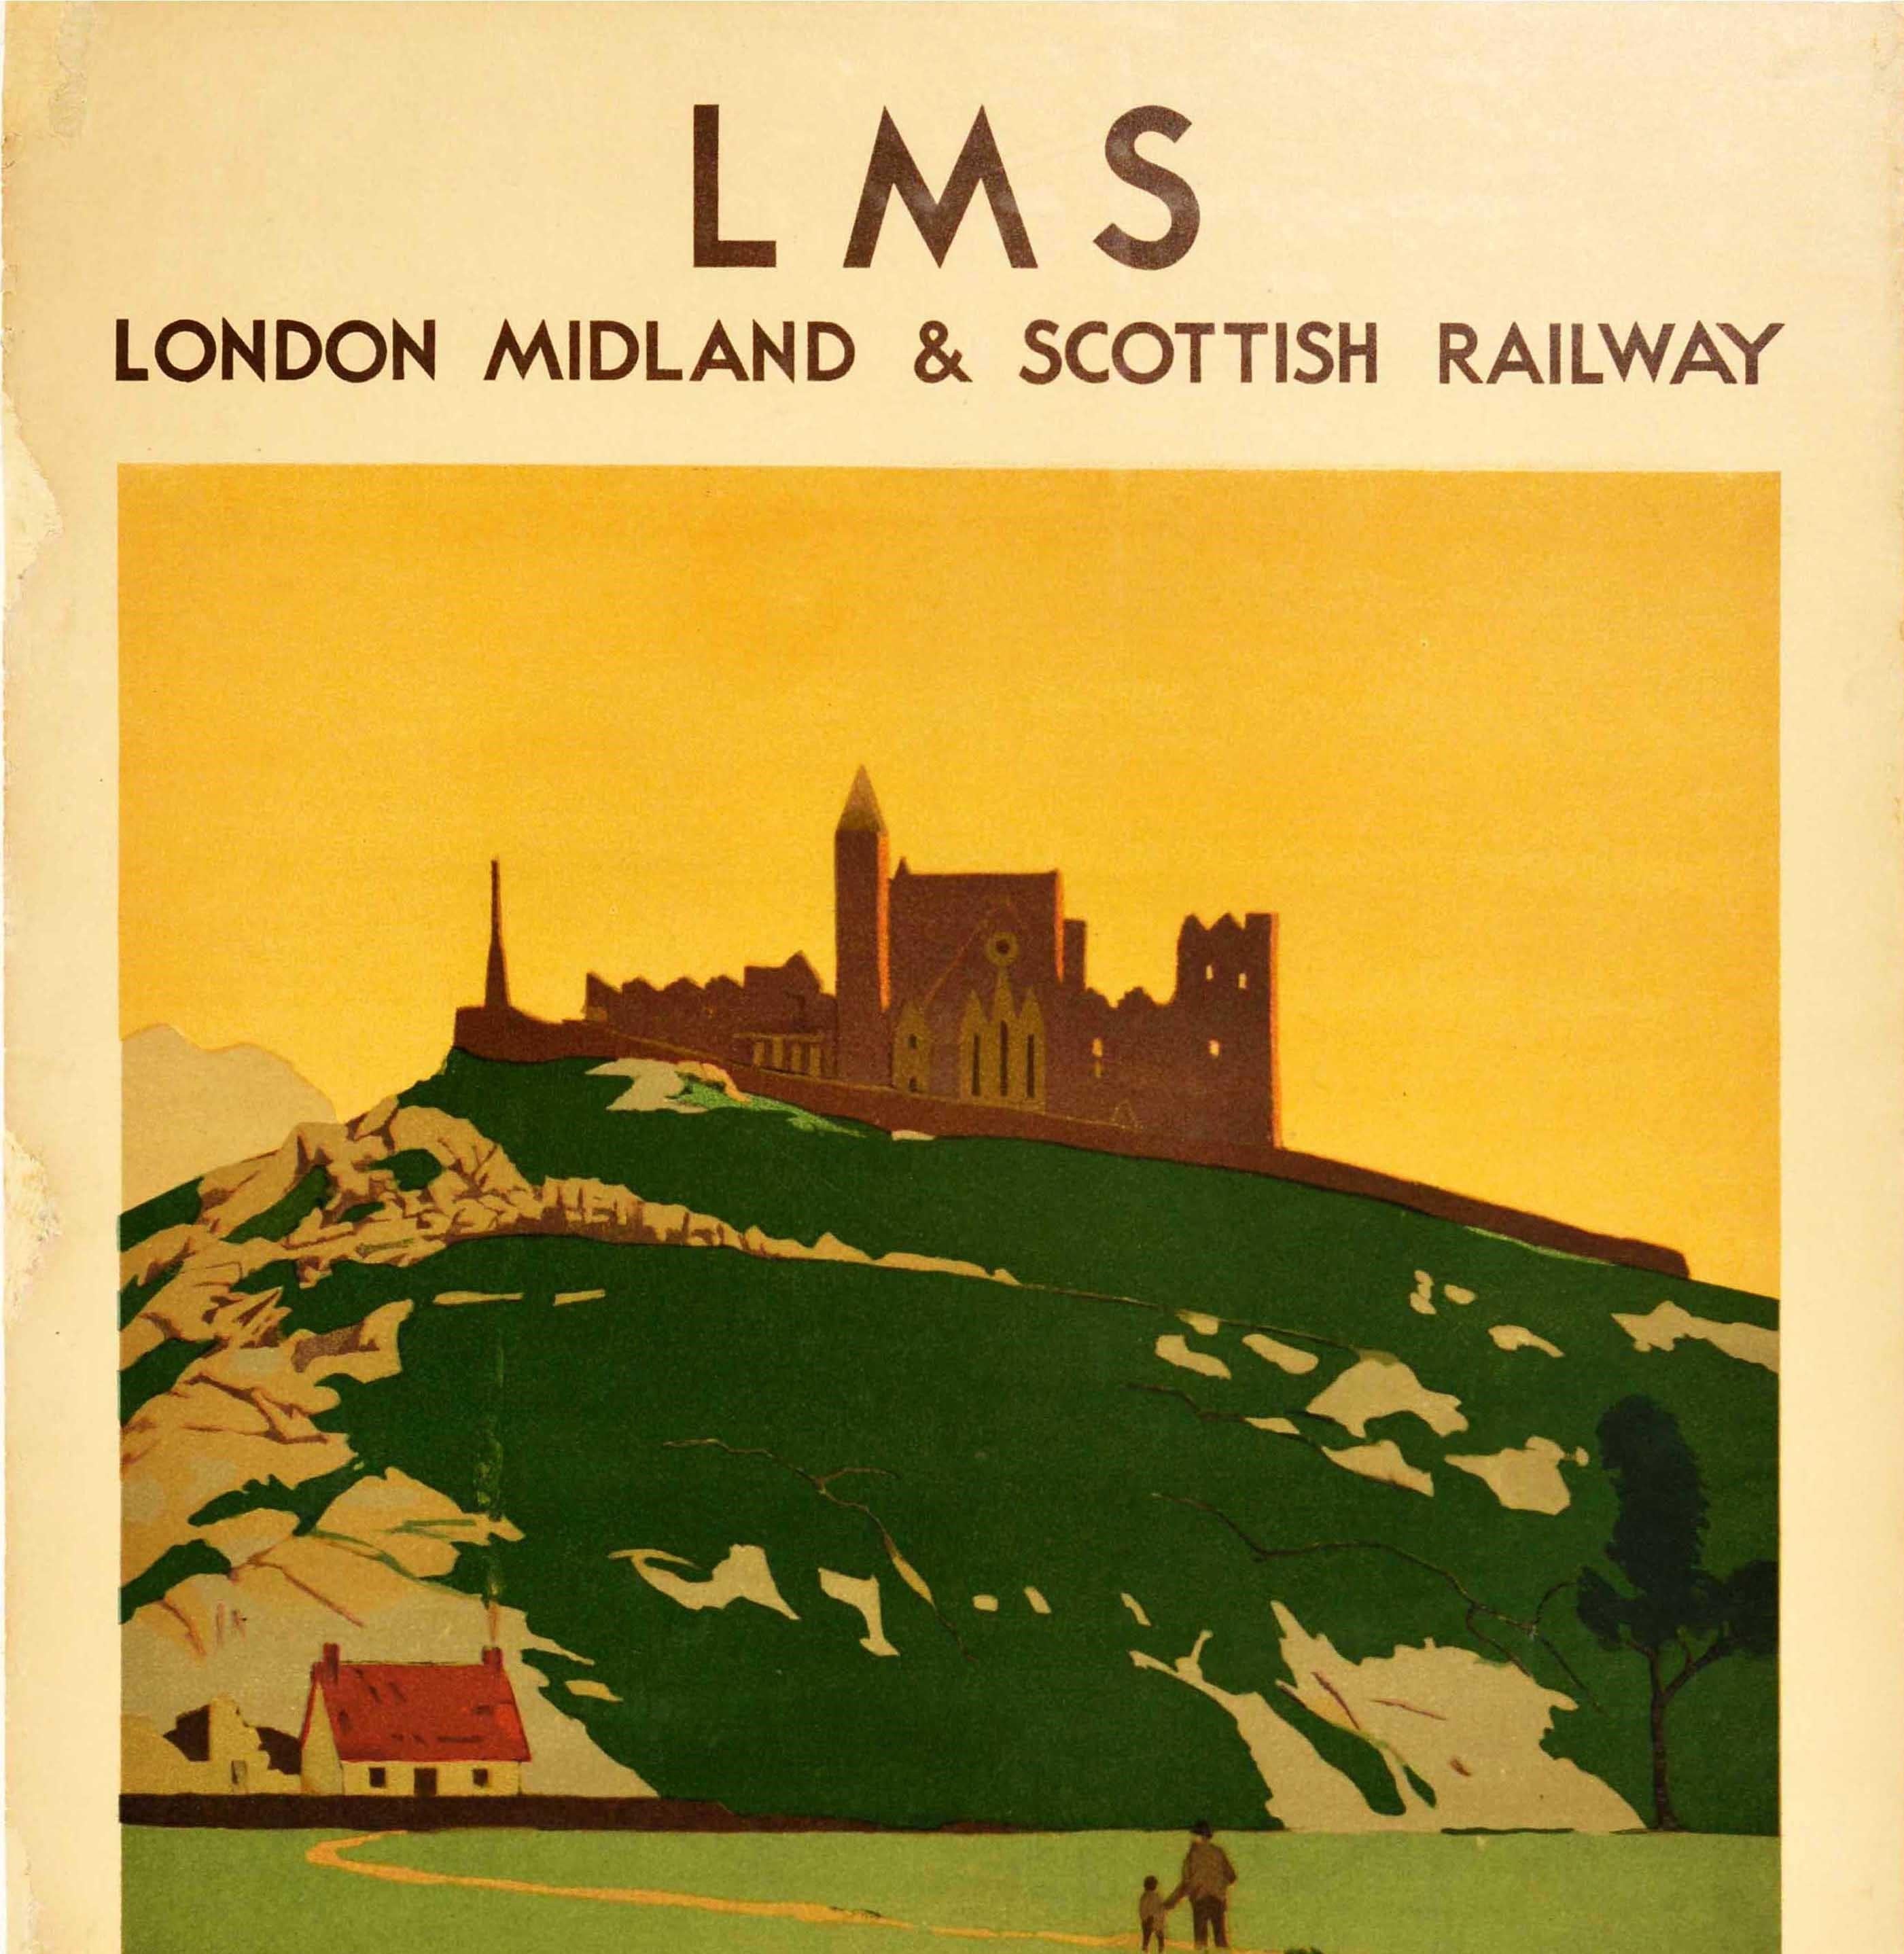 Original vintage LMS London Midland and Scottish railway travel poster - Rock of Cashel Ireland for Holidays - featuring artwork by the notable British artist and illustrator Norman Wilkinson (1878-1971) depicting a scenic view of a man and child